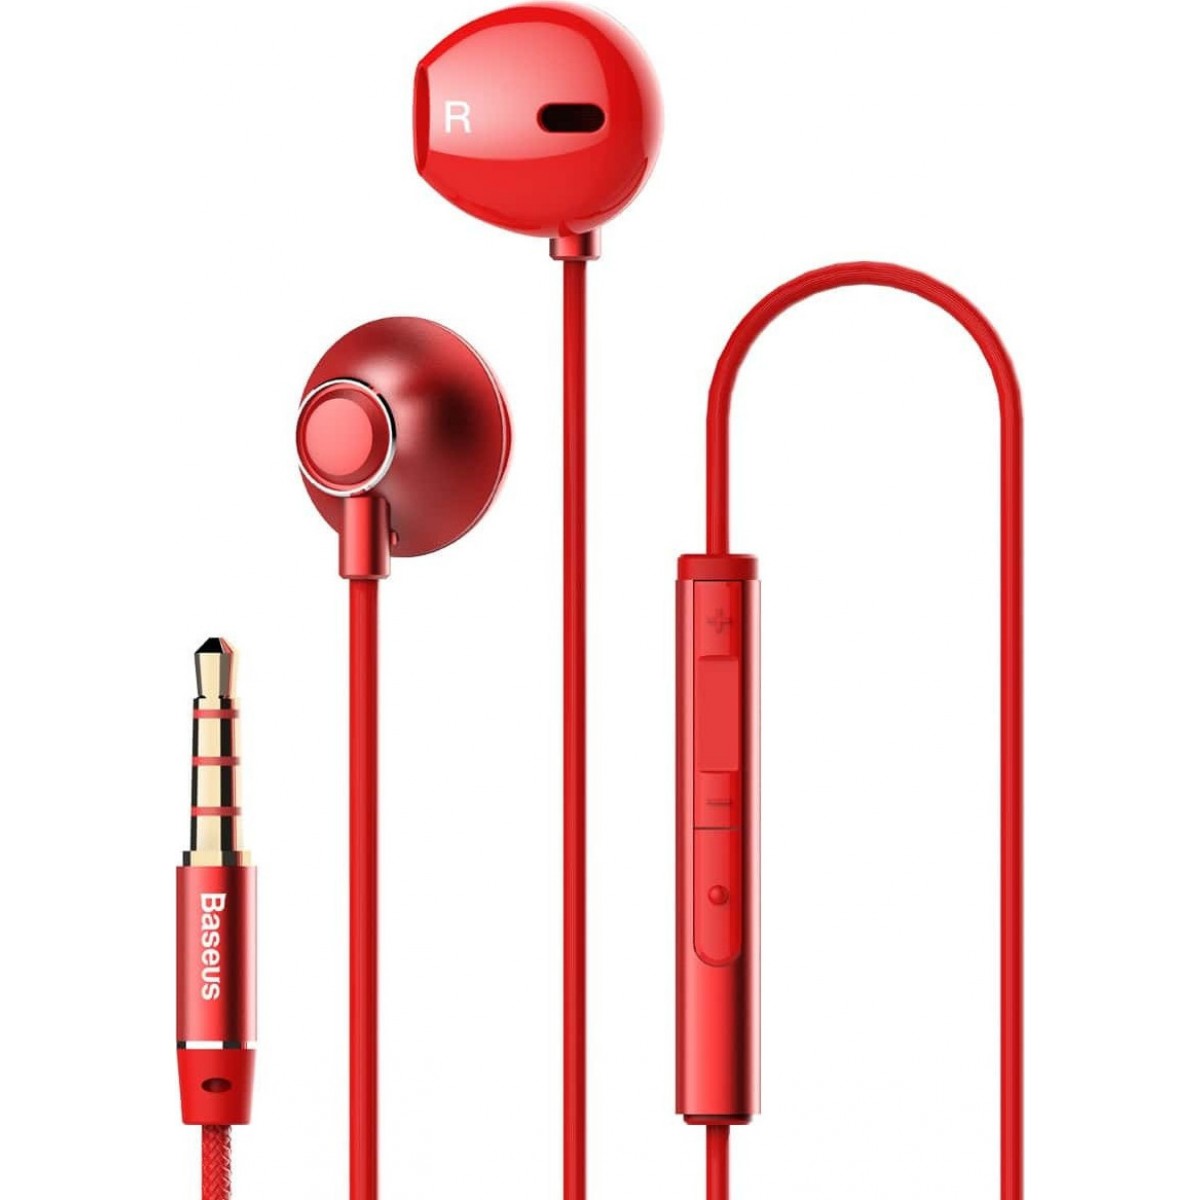 HANDSFREE BASEUS ENCOK WIRED EARPHONE H06 RED NGH06-09